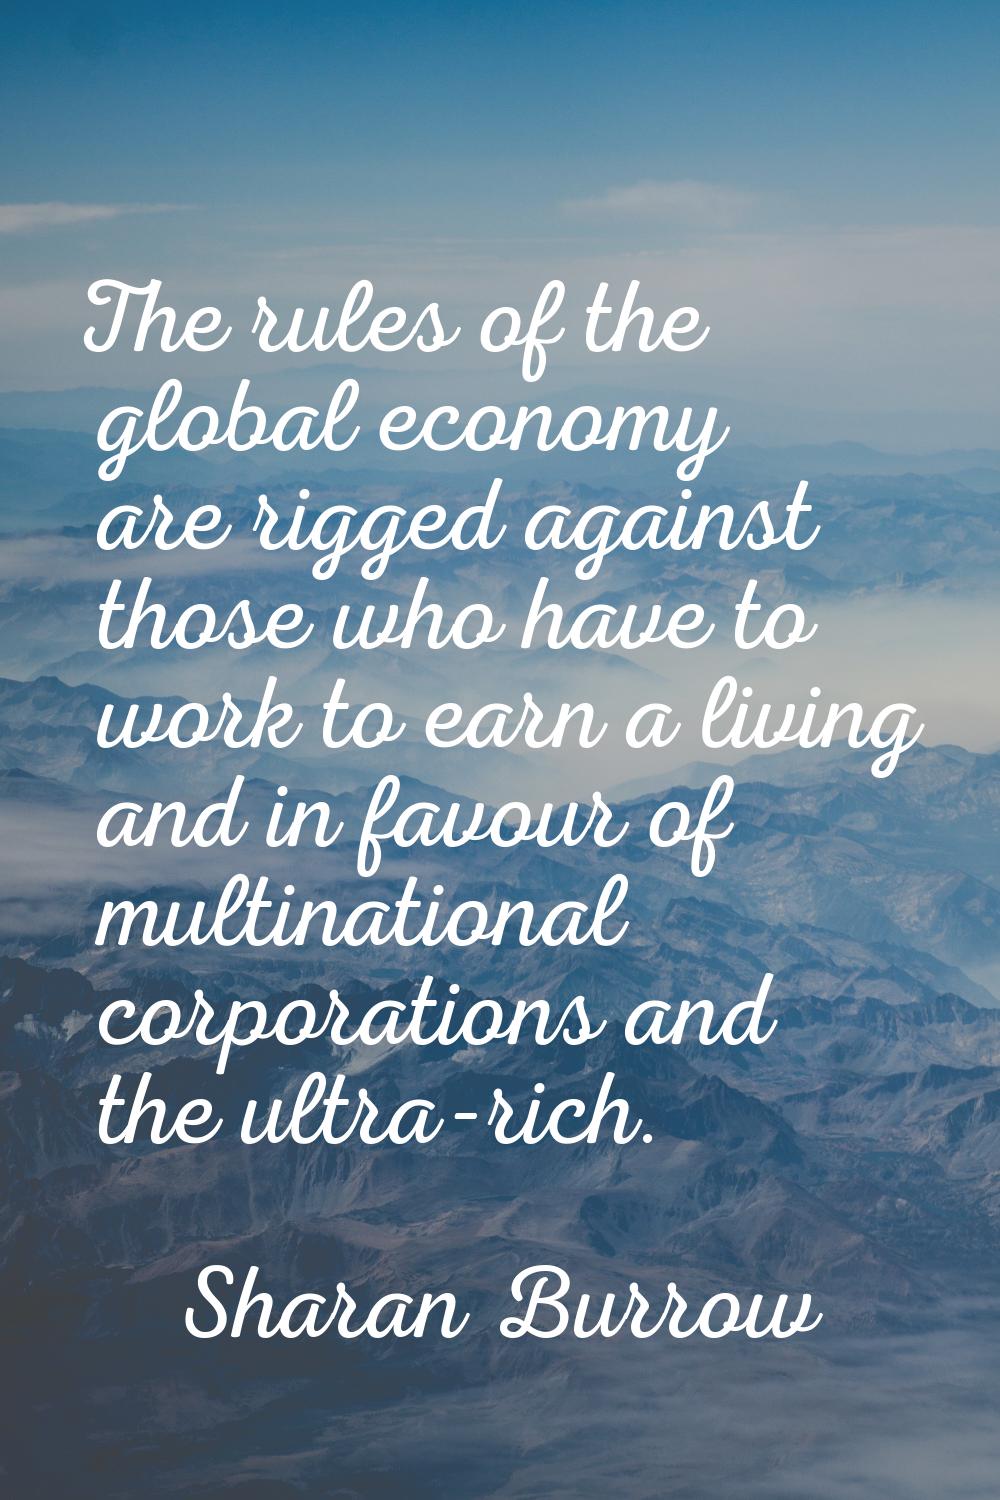 The rules of the global economy are rigged against those who have to work to earn a living and in f